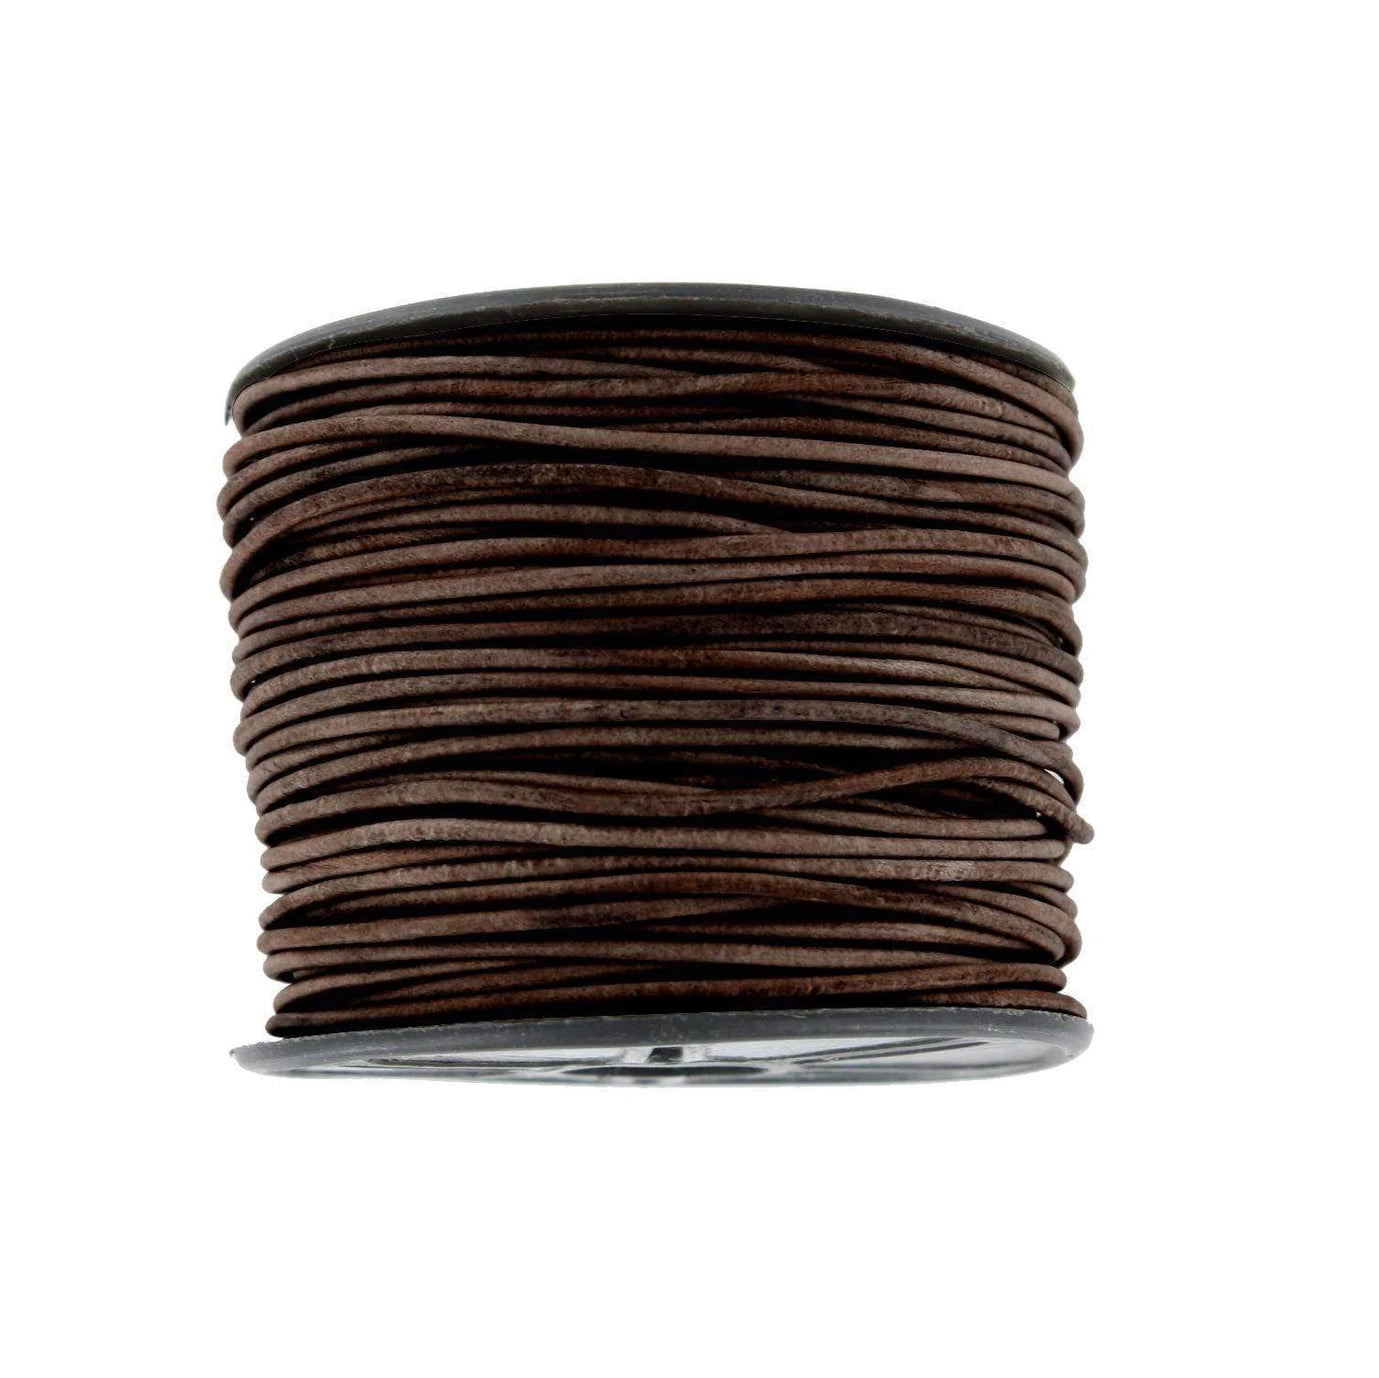 1/16 (1.5mm) Antique Brown, Round Cord, Leather, #M-1630-ANTBRO